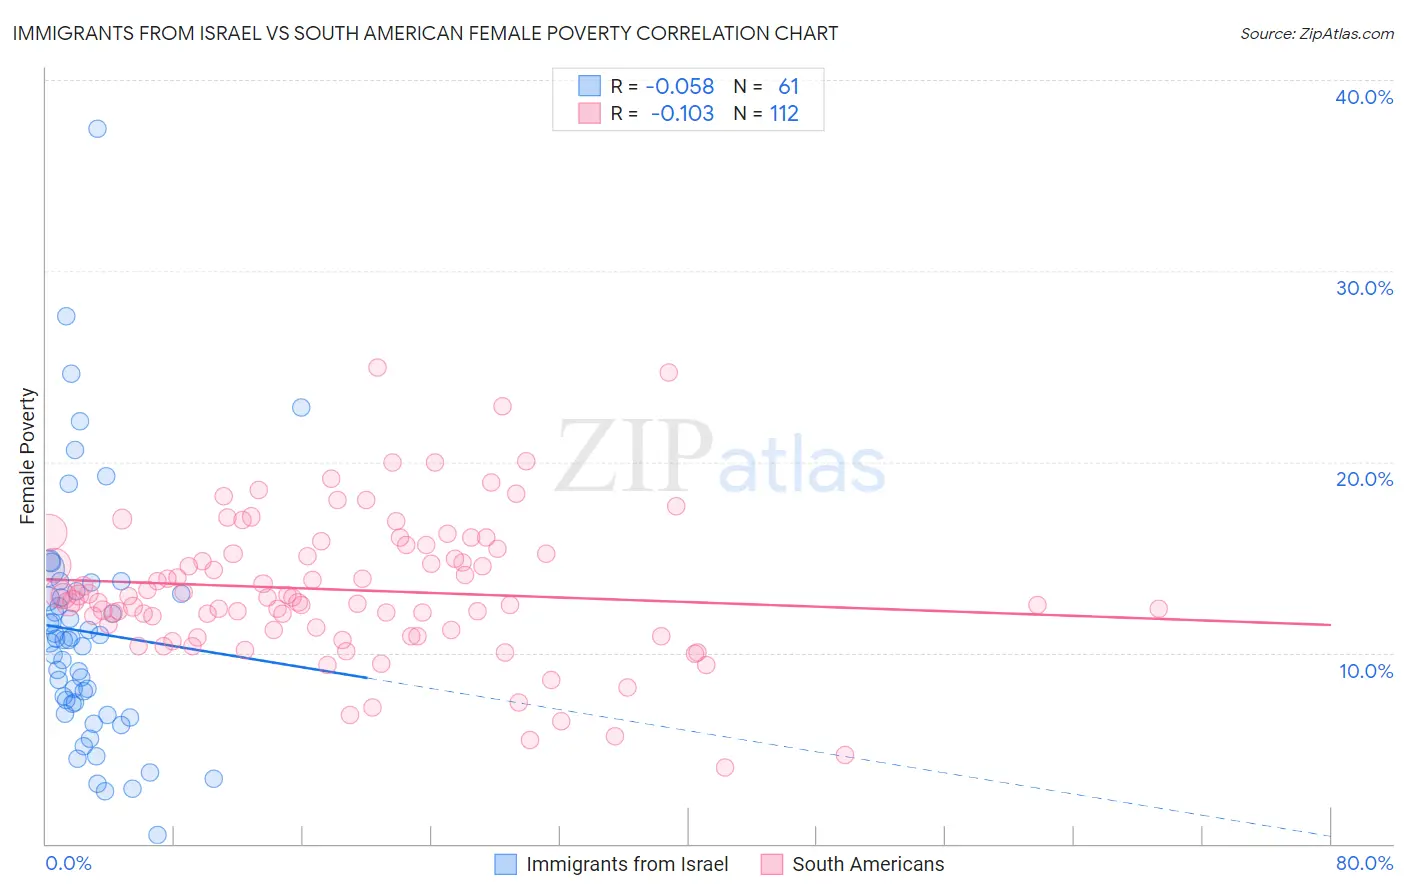 Immigrants from Israel vs South American Female Poverty